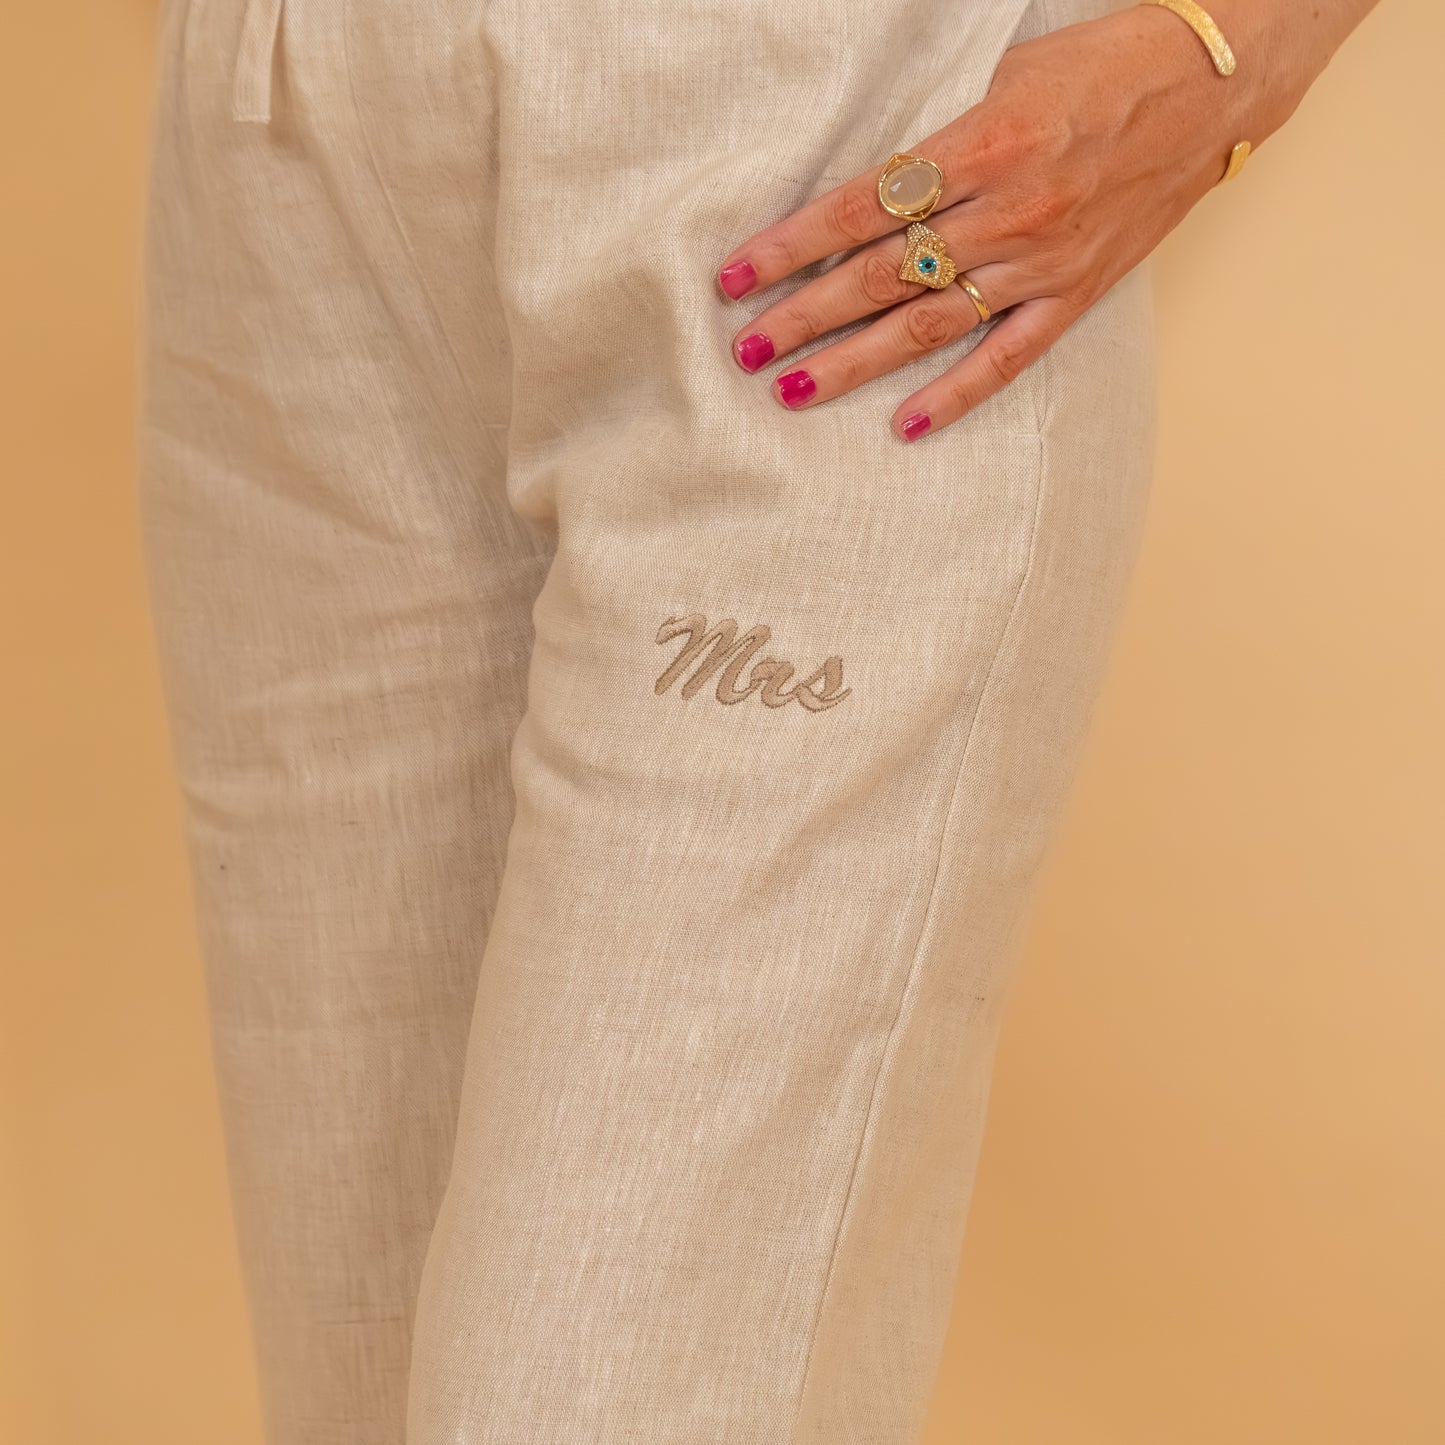 Mrs Embroidered Linen Long Pants